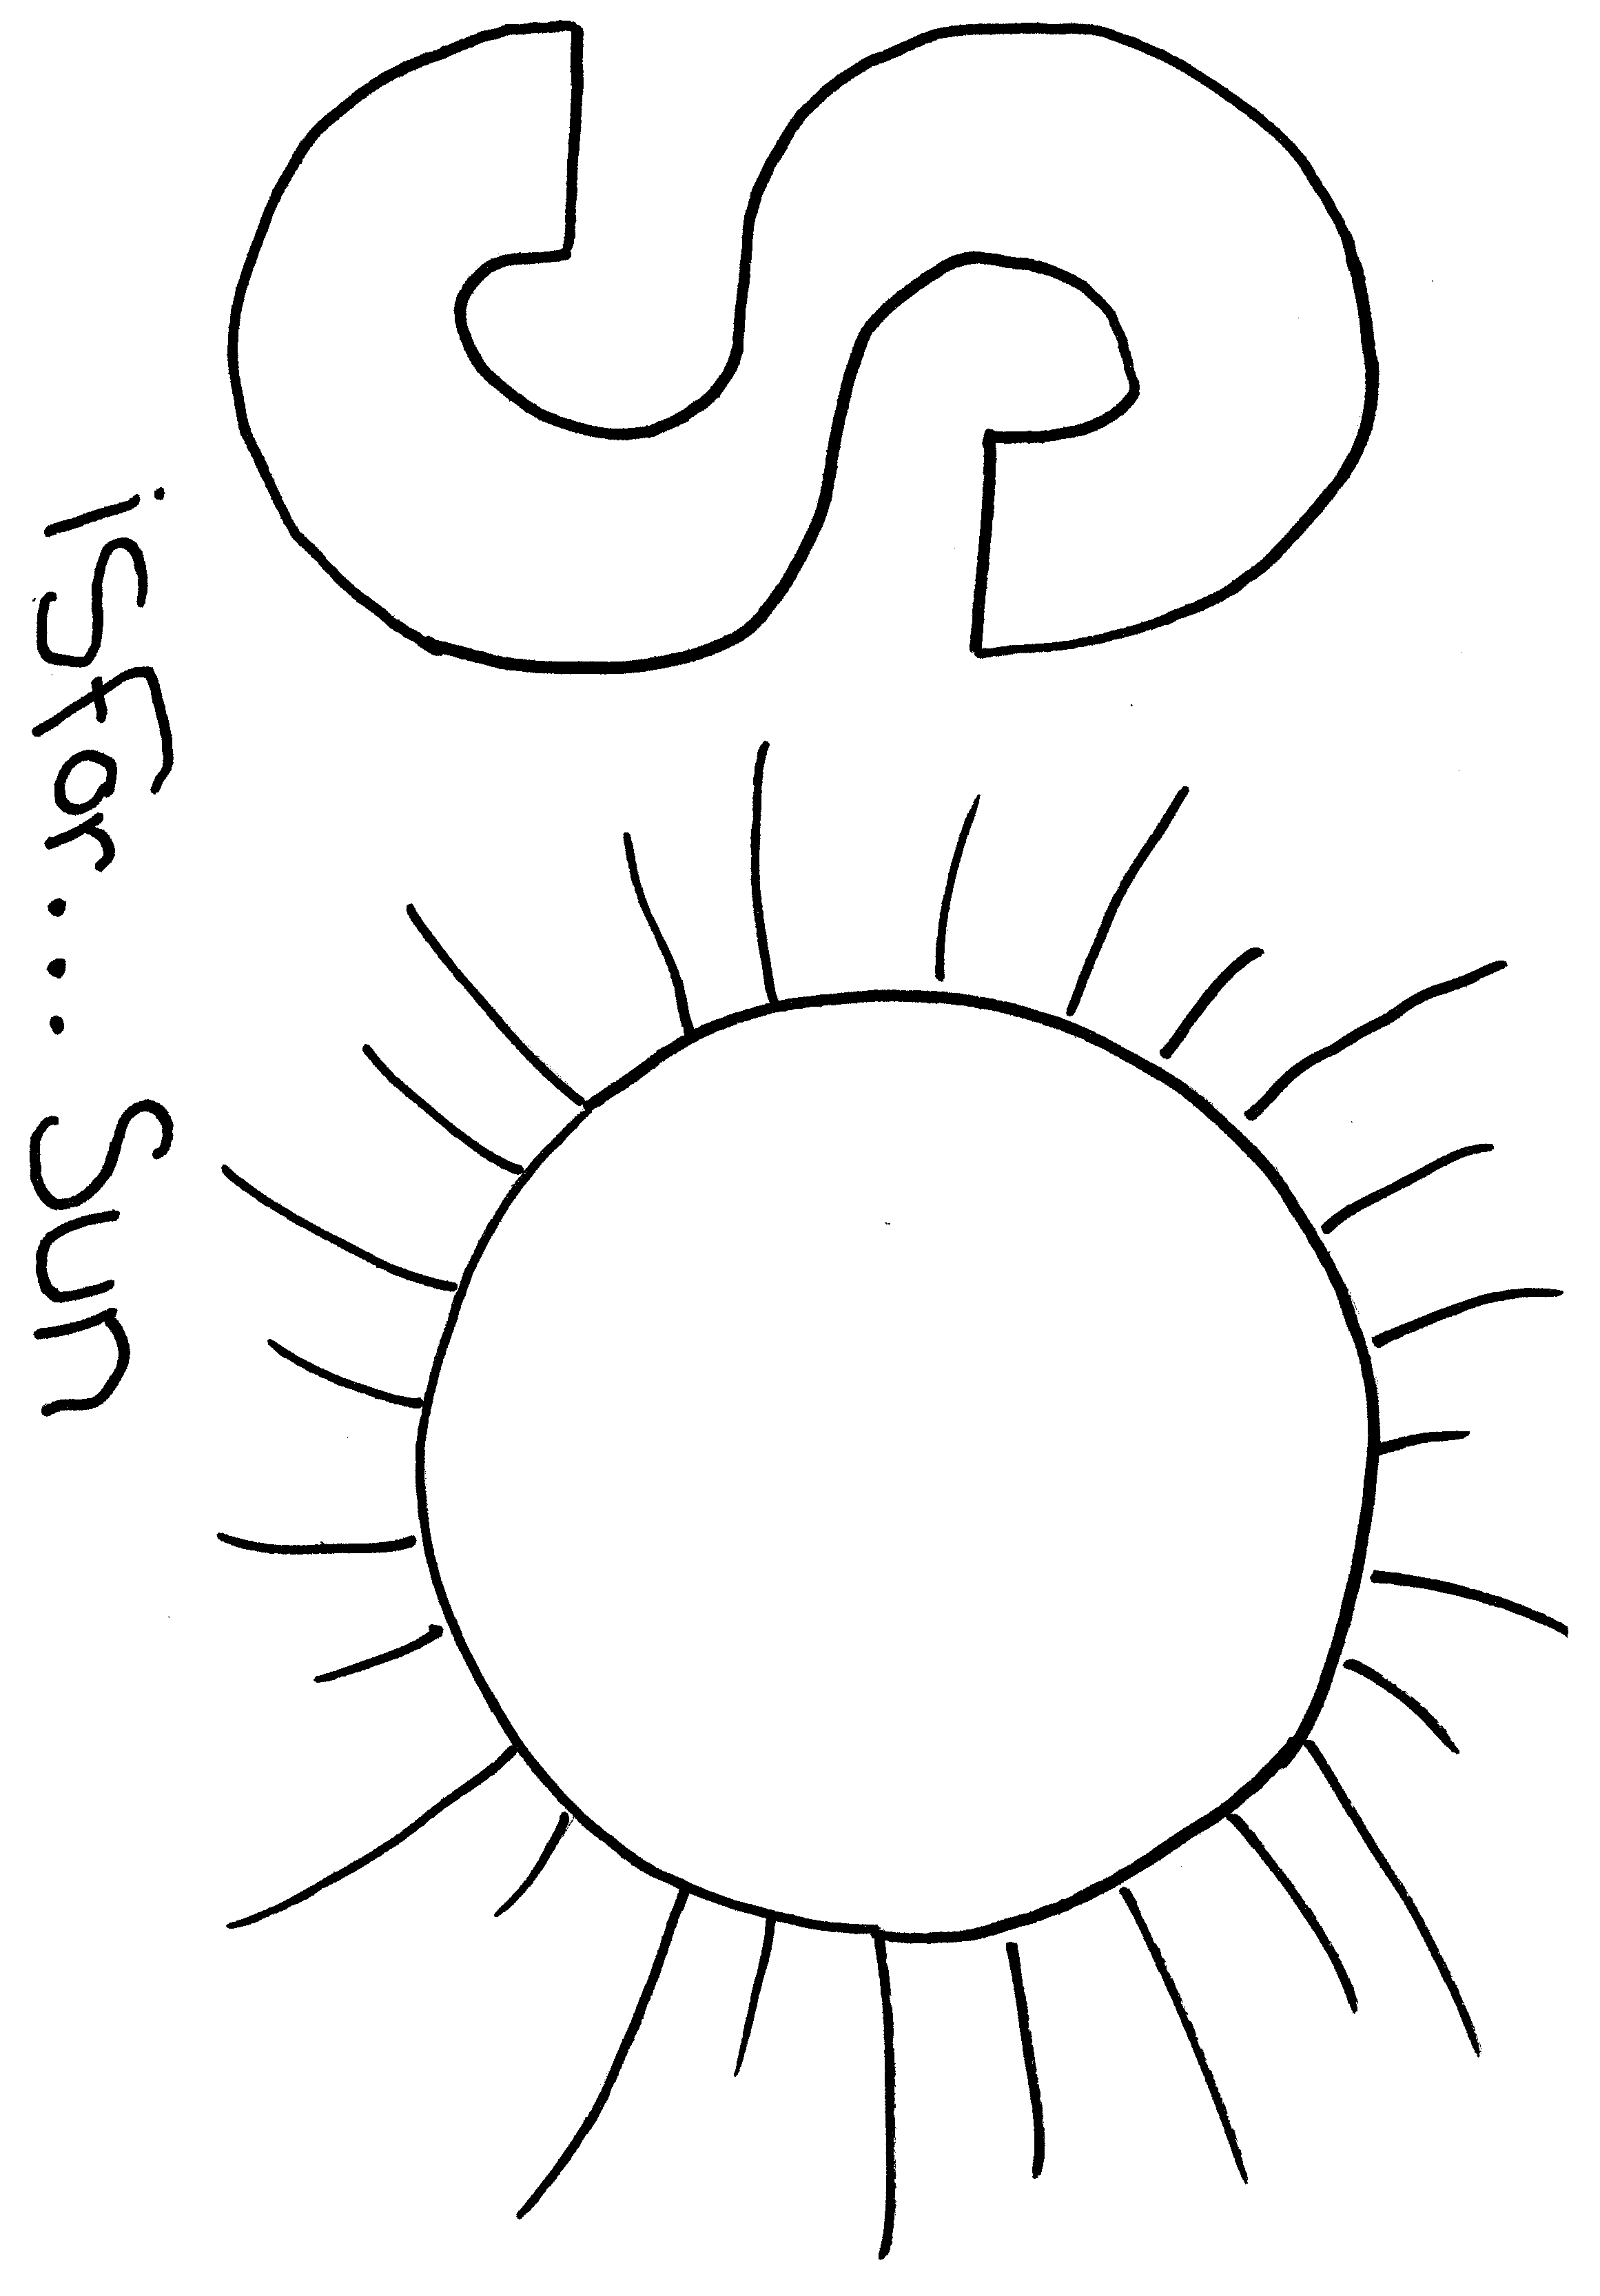 free family activity - alphabet coloring page featuring the letter S